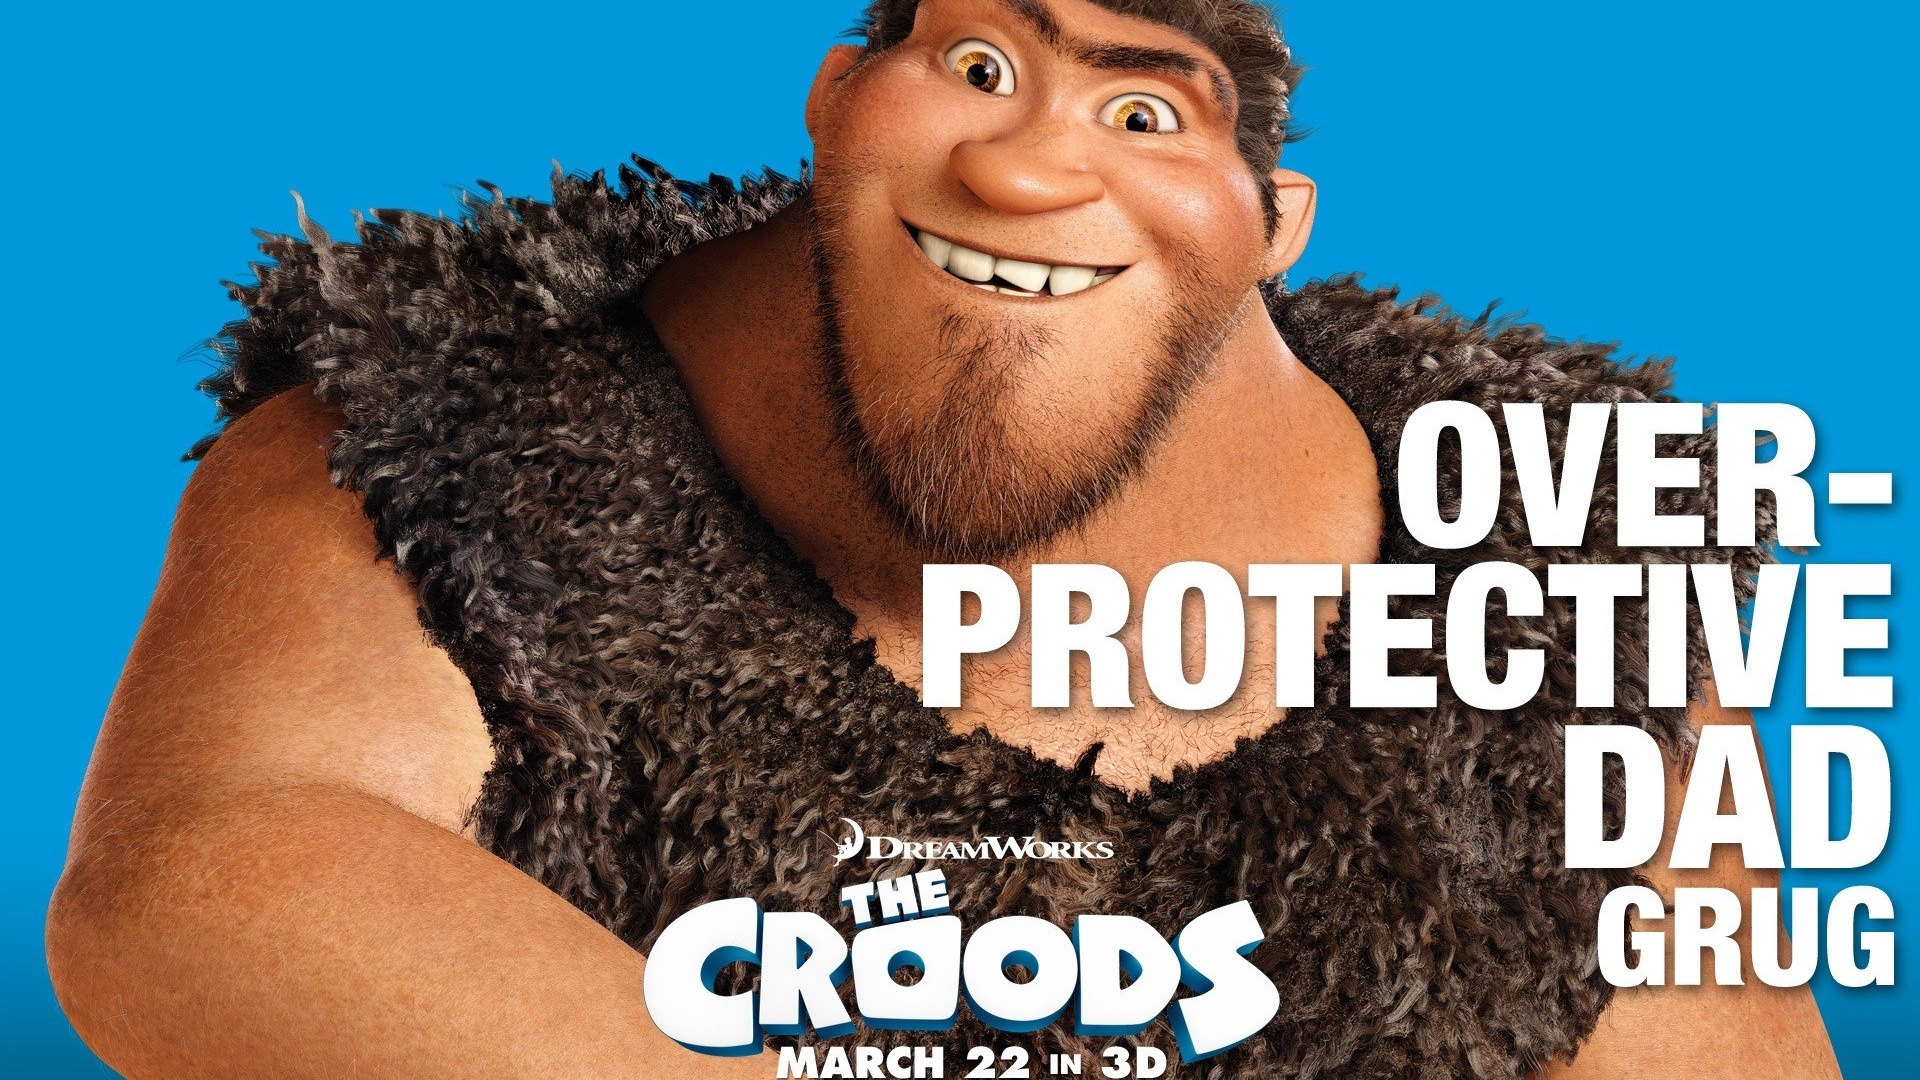 V Croods HD Movie Wallpapers #11 - 1920x1080